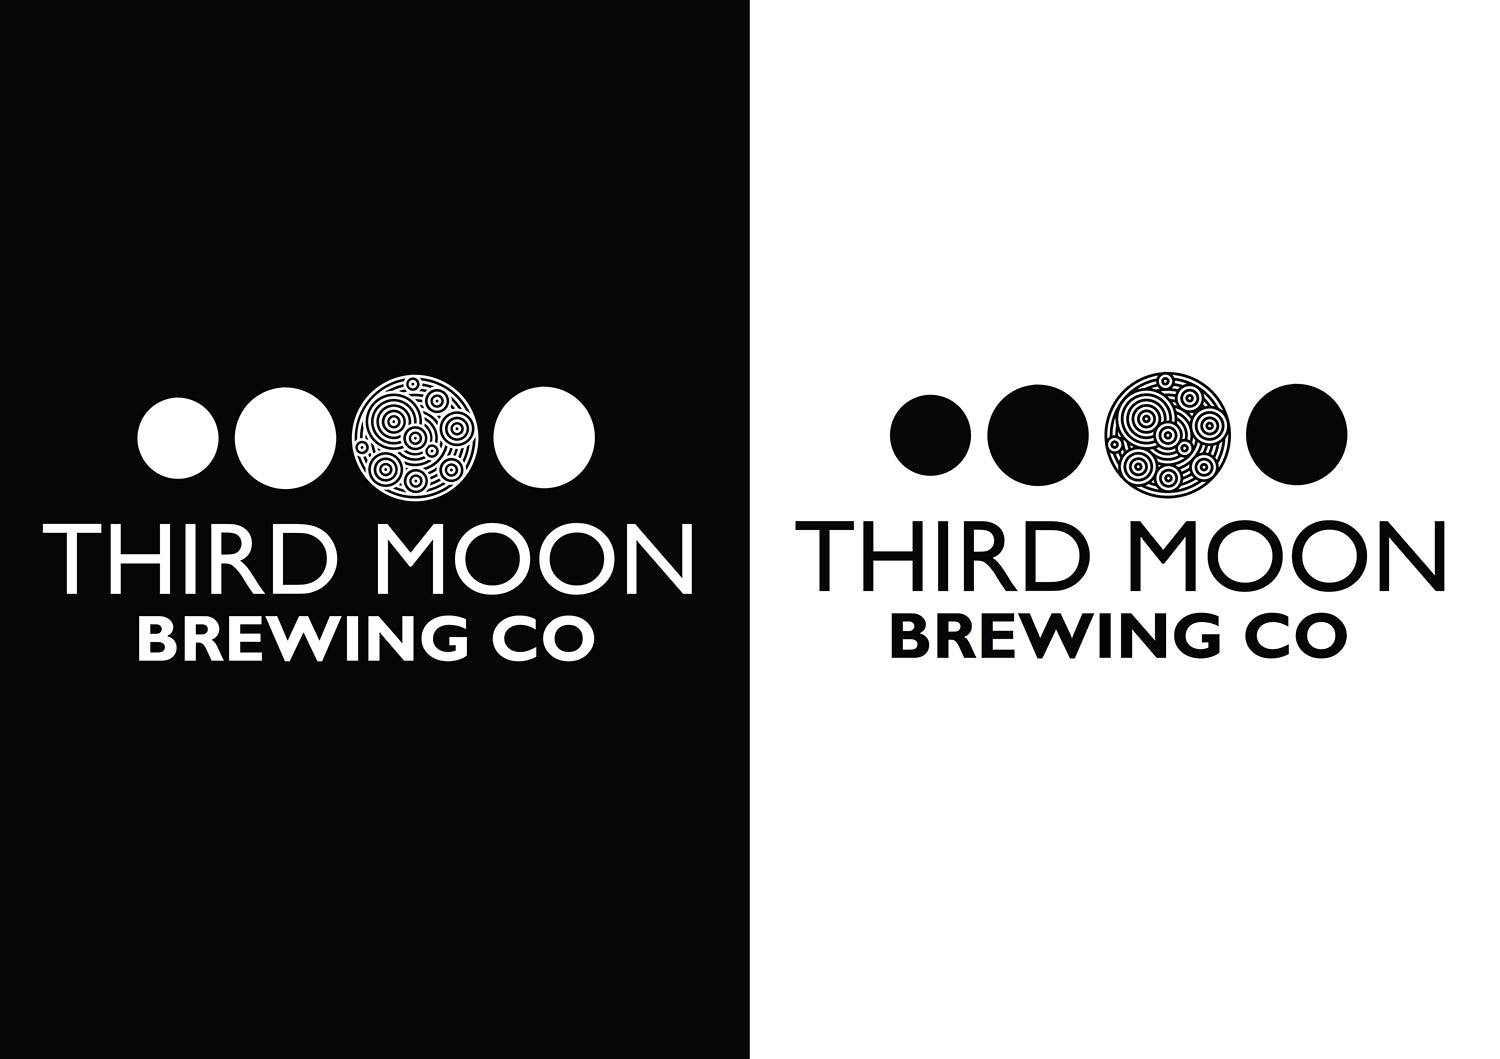 Third Moon Brewing Co. Contest and Recipe Kit Collab